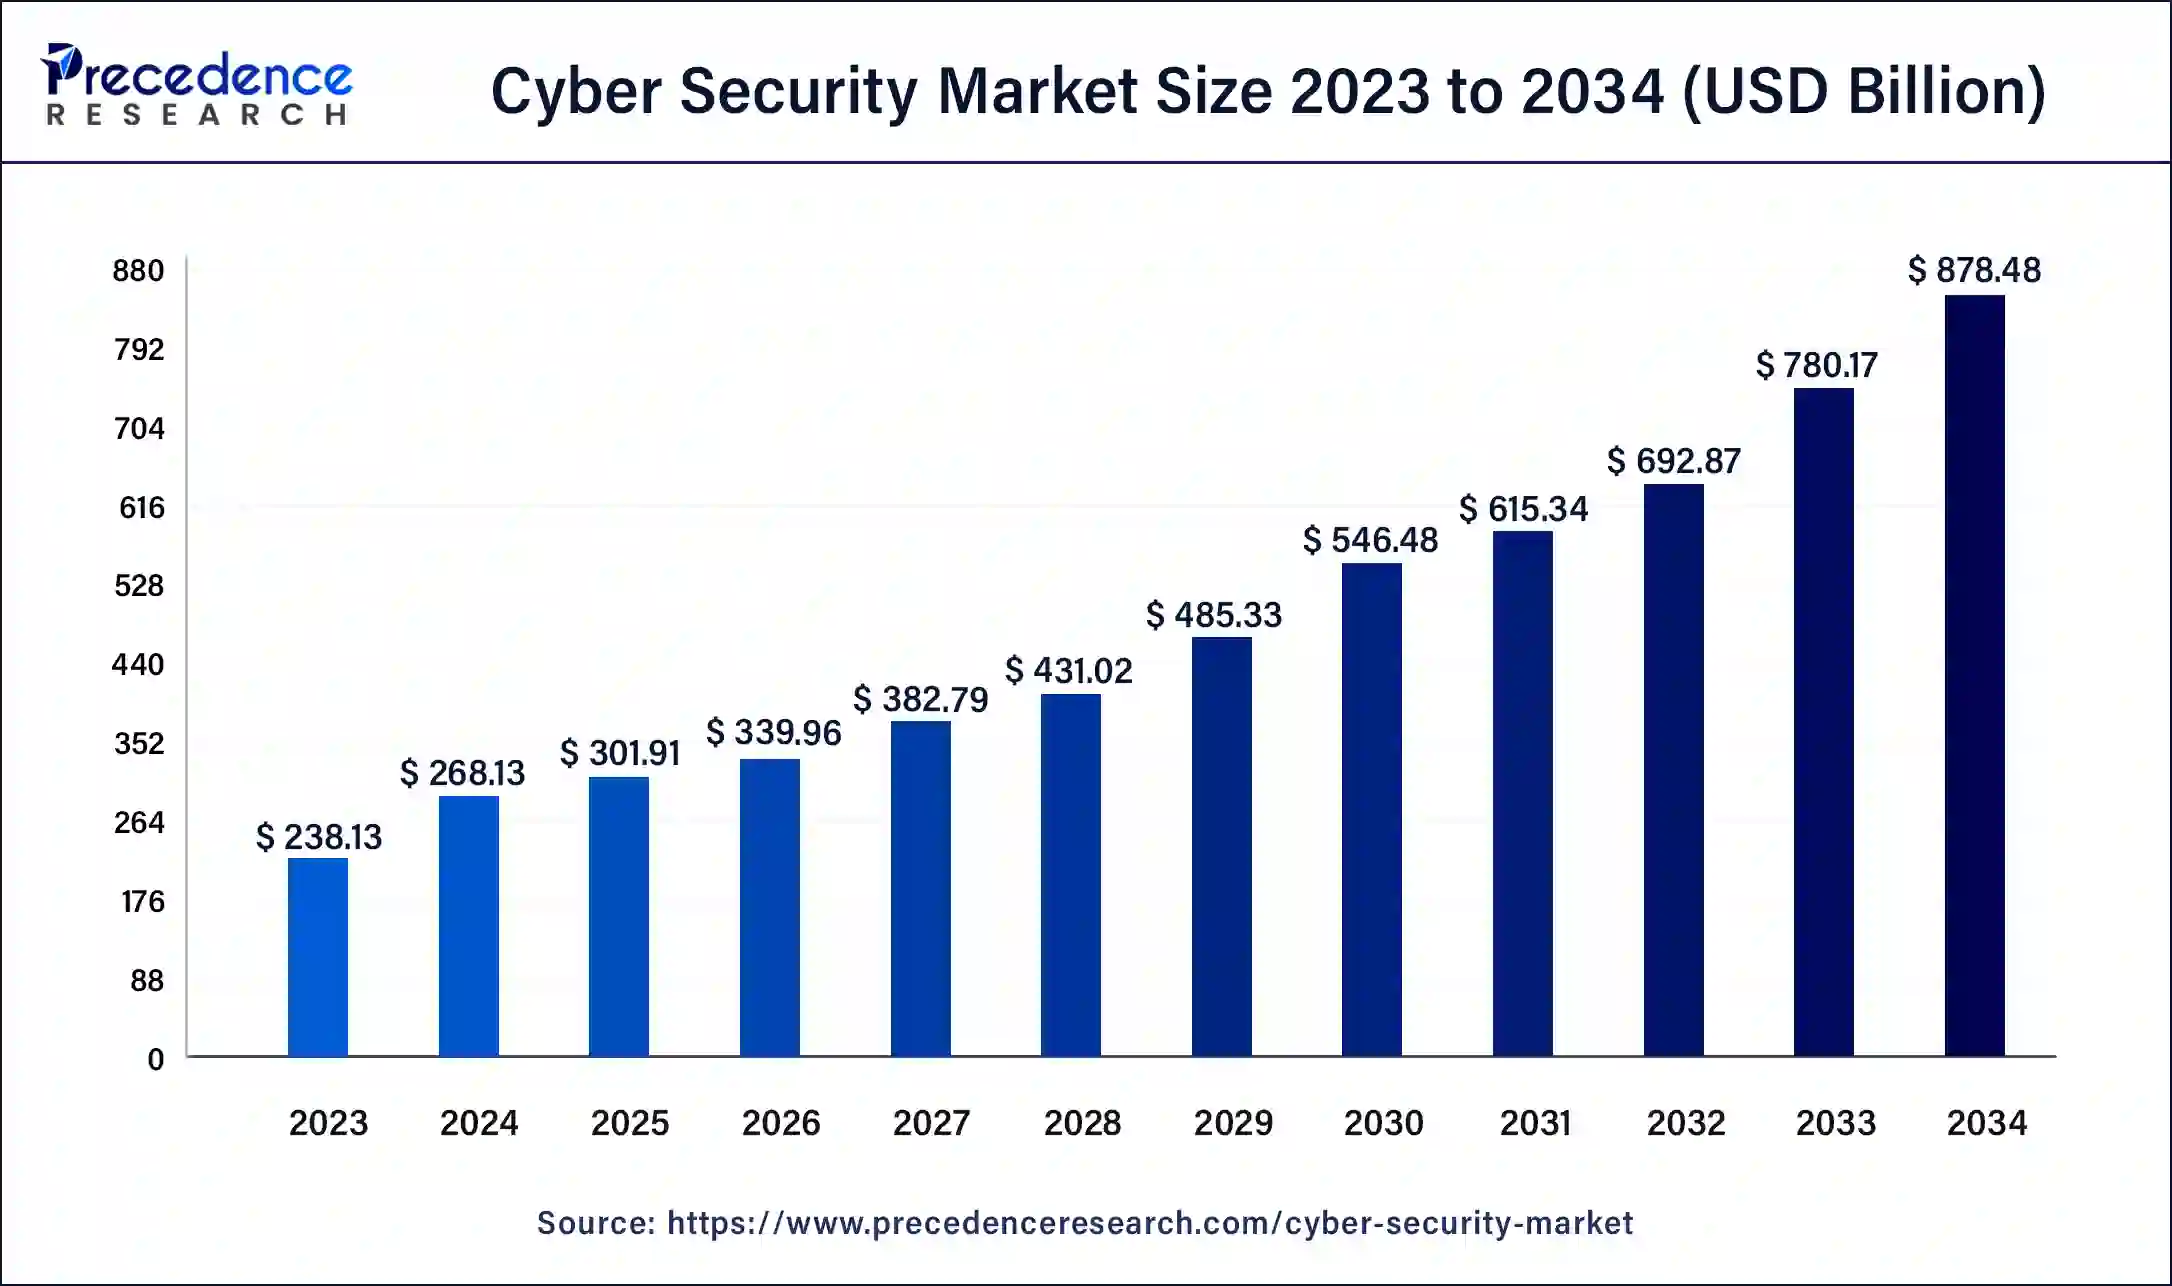 Cyber Security Market Size 2024 to 2034